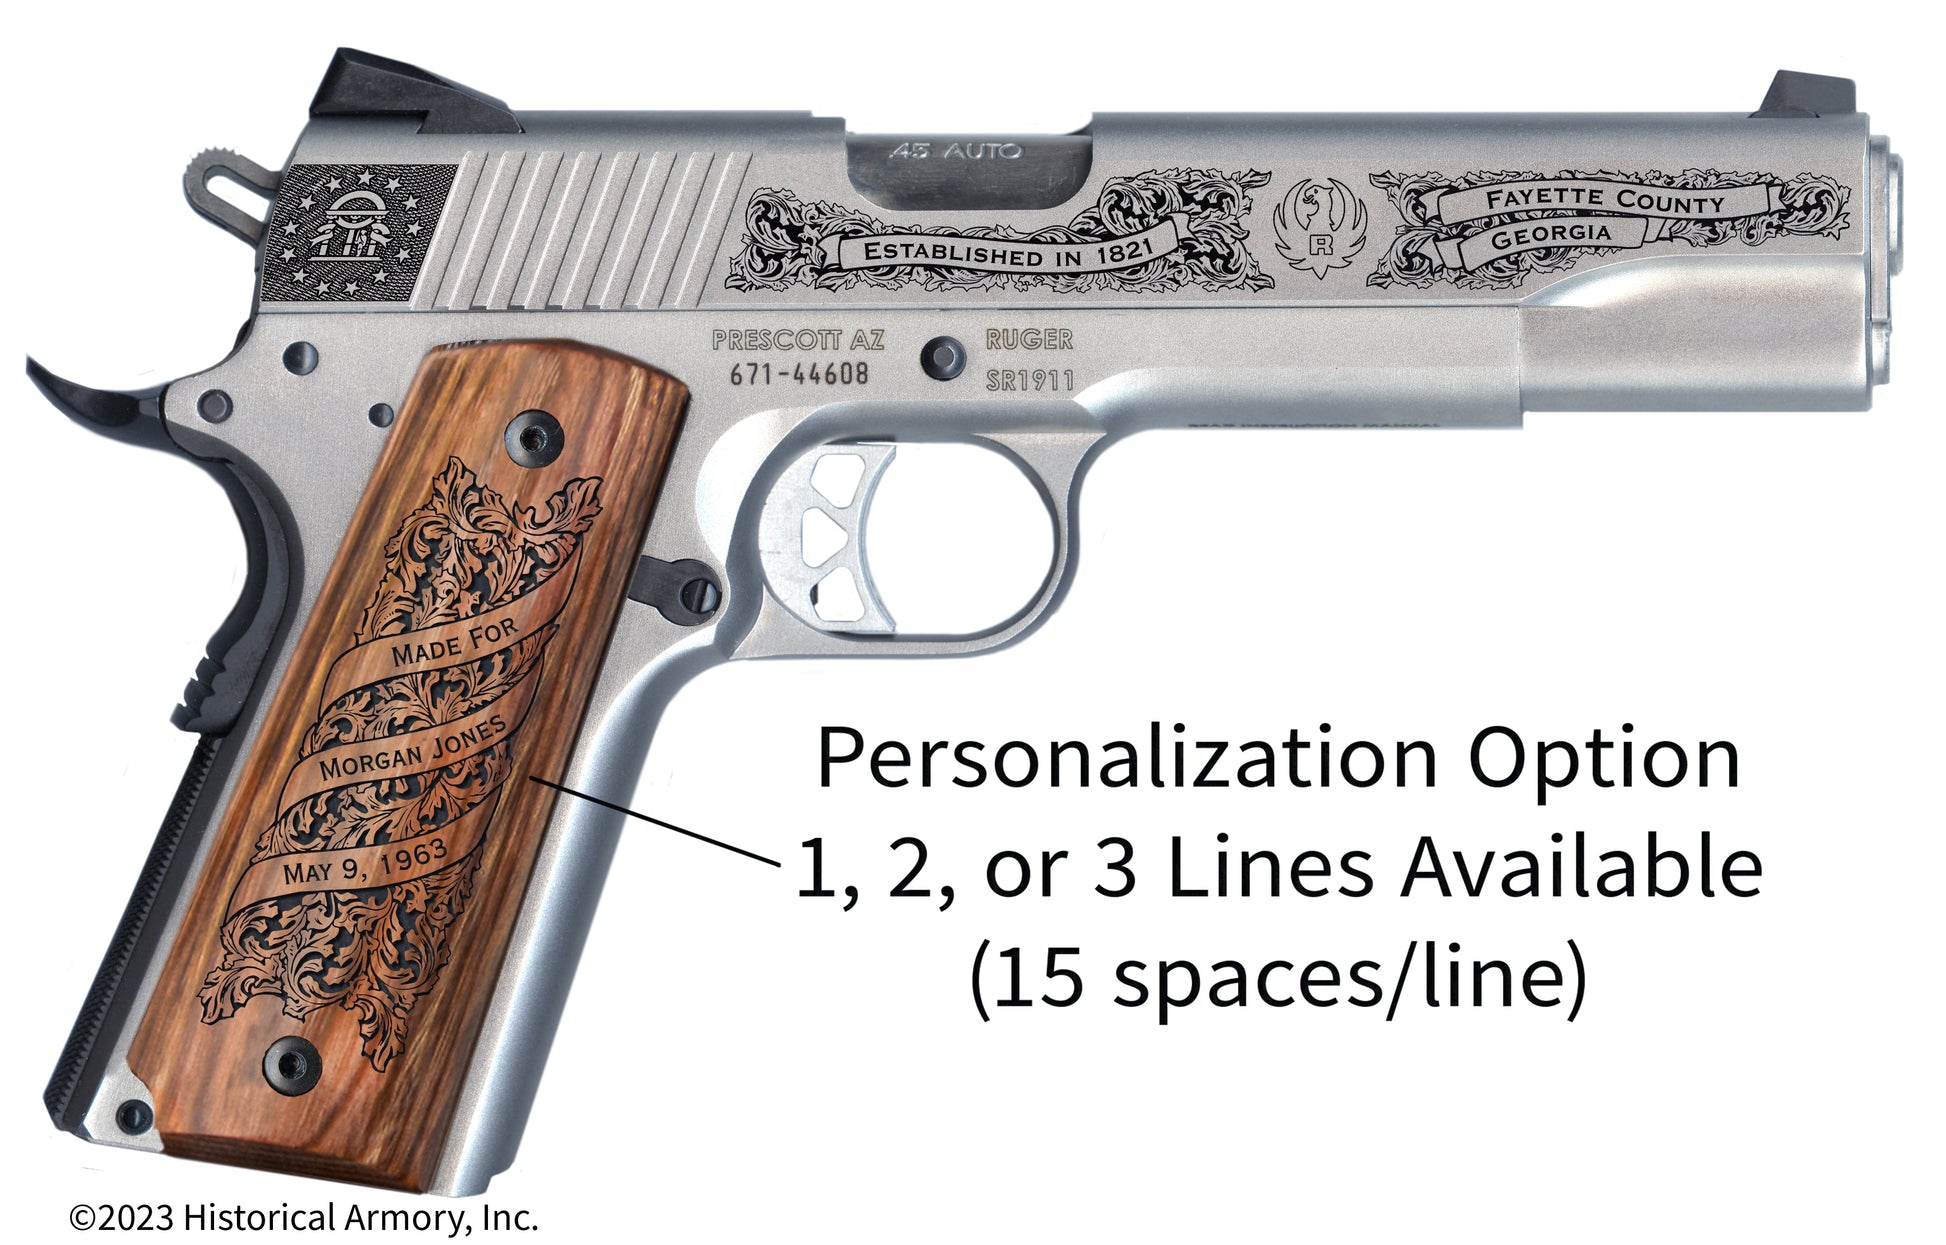 Fayette County Georgia Personalized Engraved .45 Auto Ruger 1911